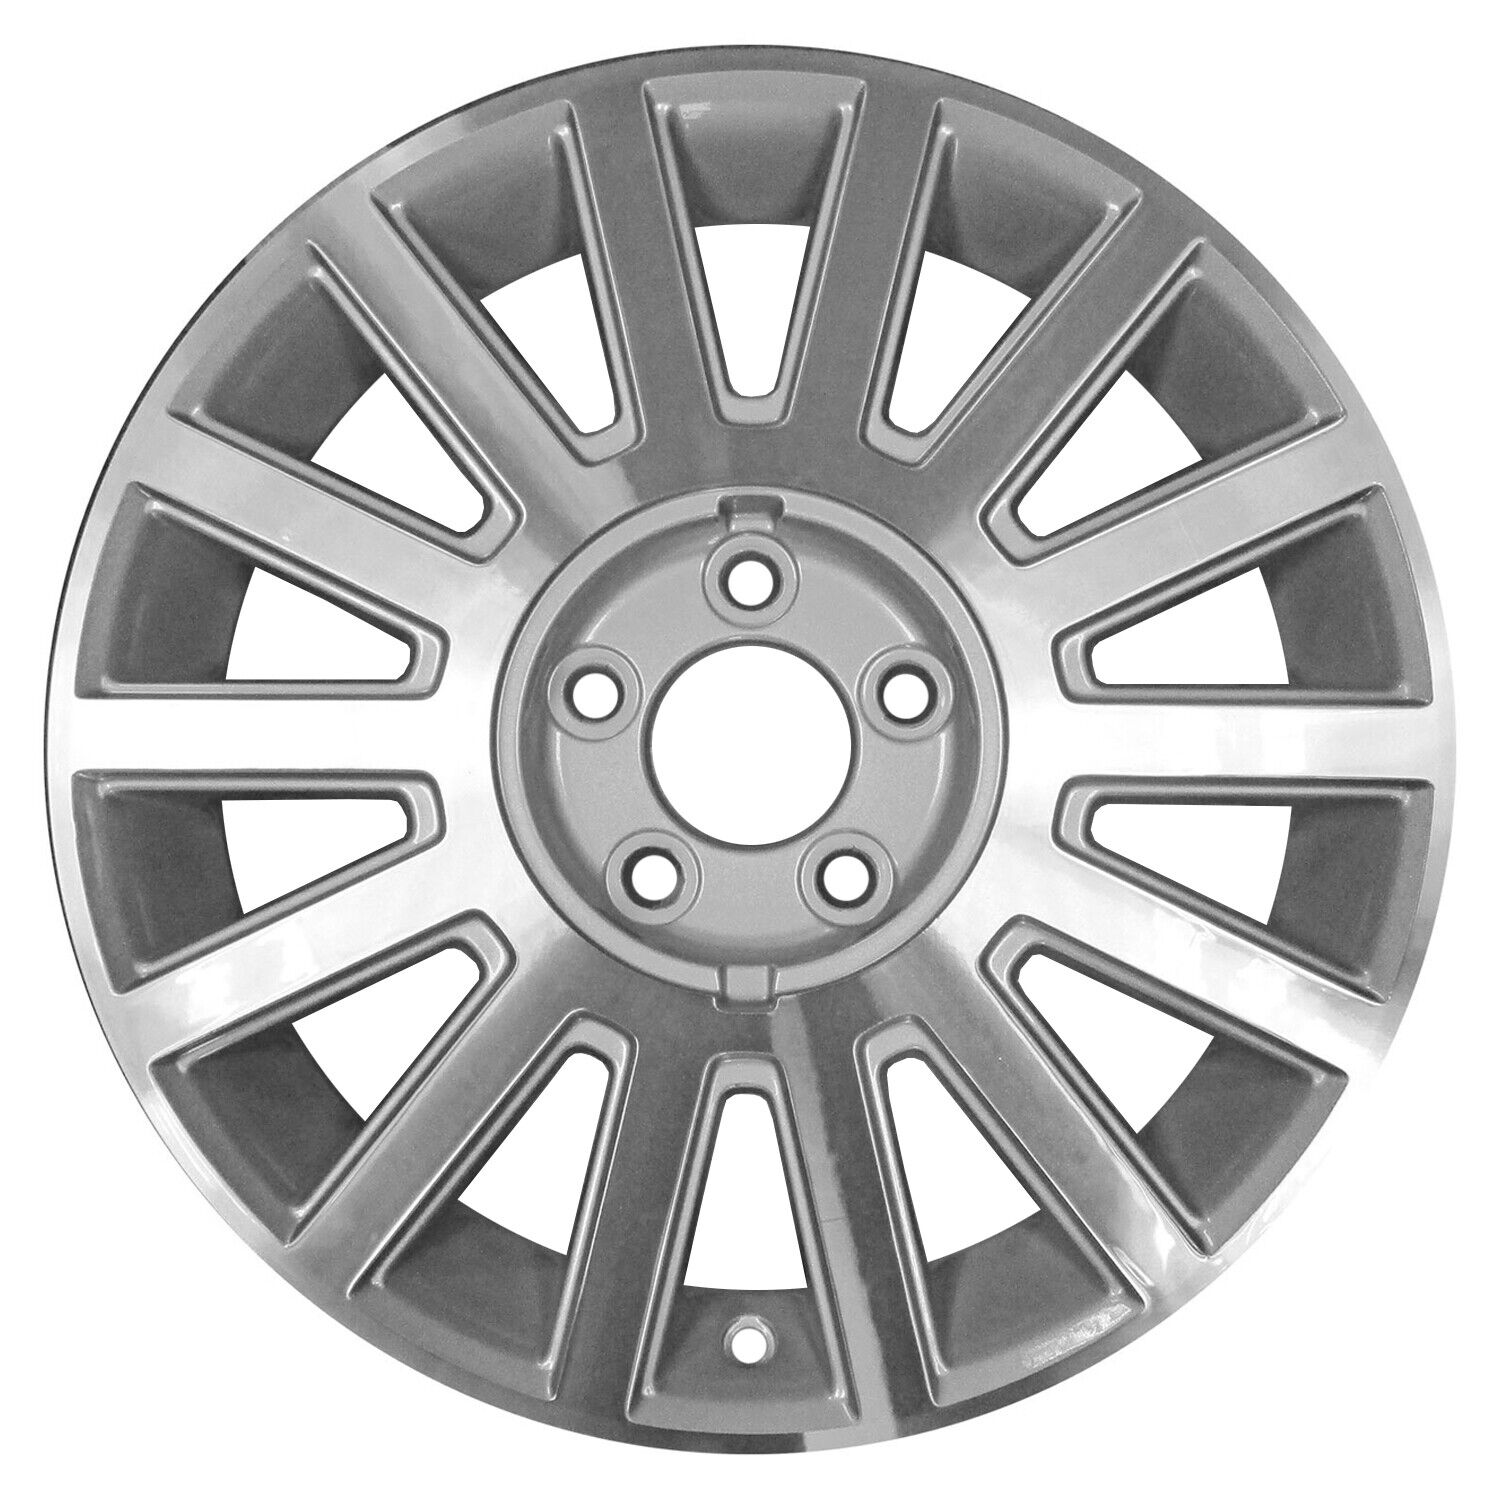 03504 Reconditioned OEM Aluminum Wheel 17x7 fits 2003-2005 Lincoln Town Car